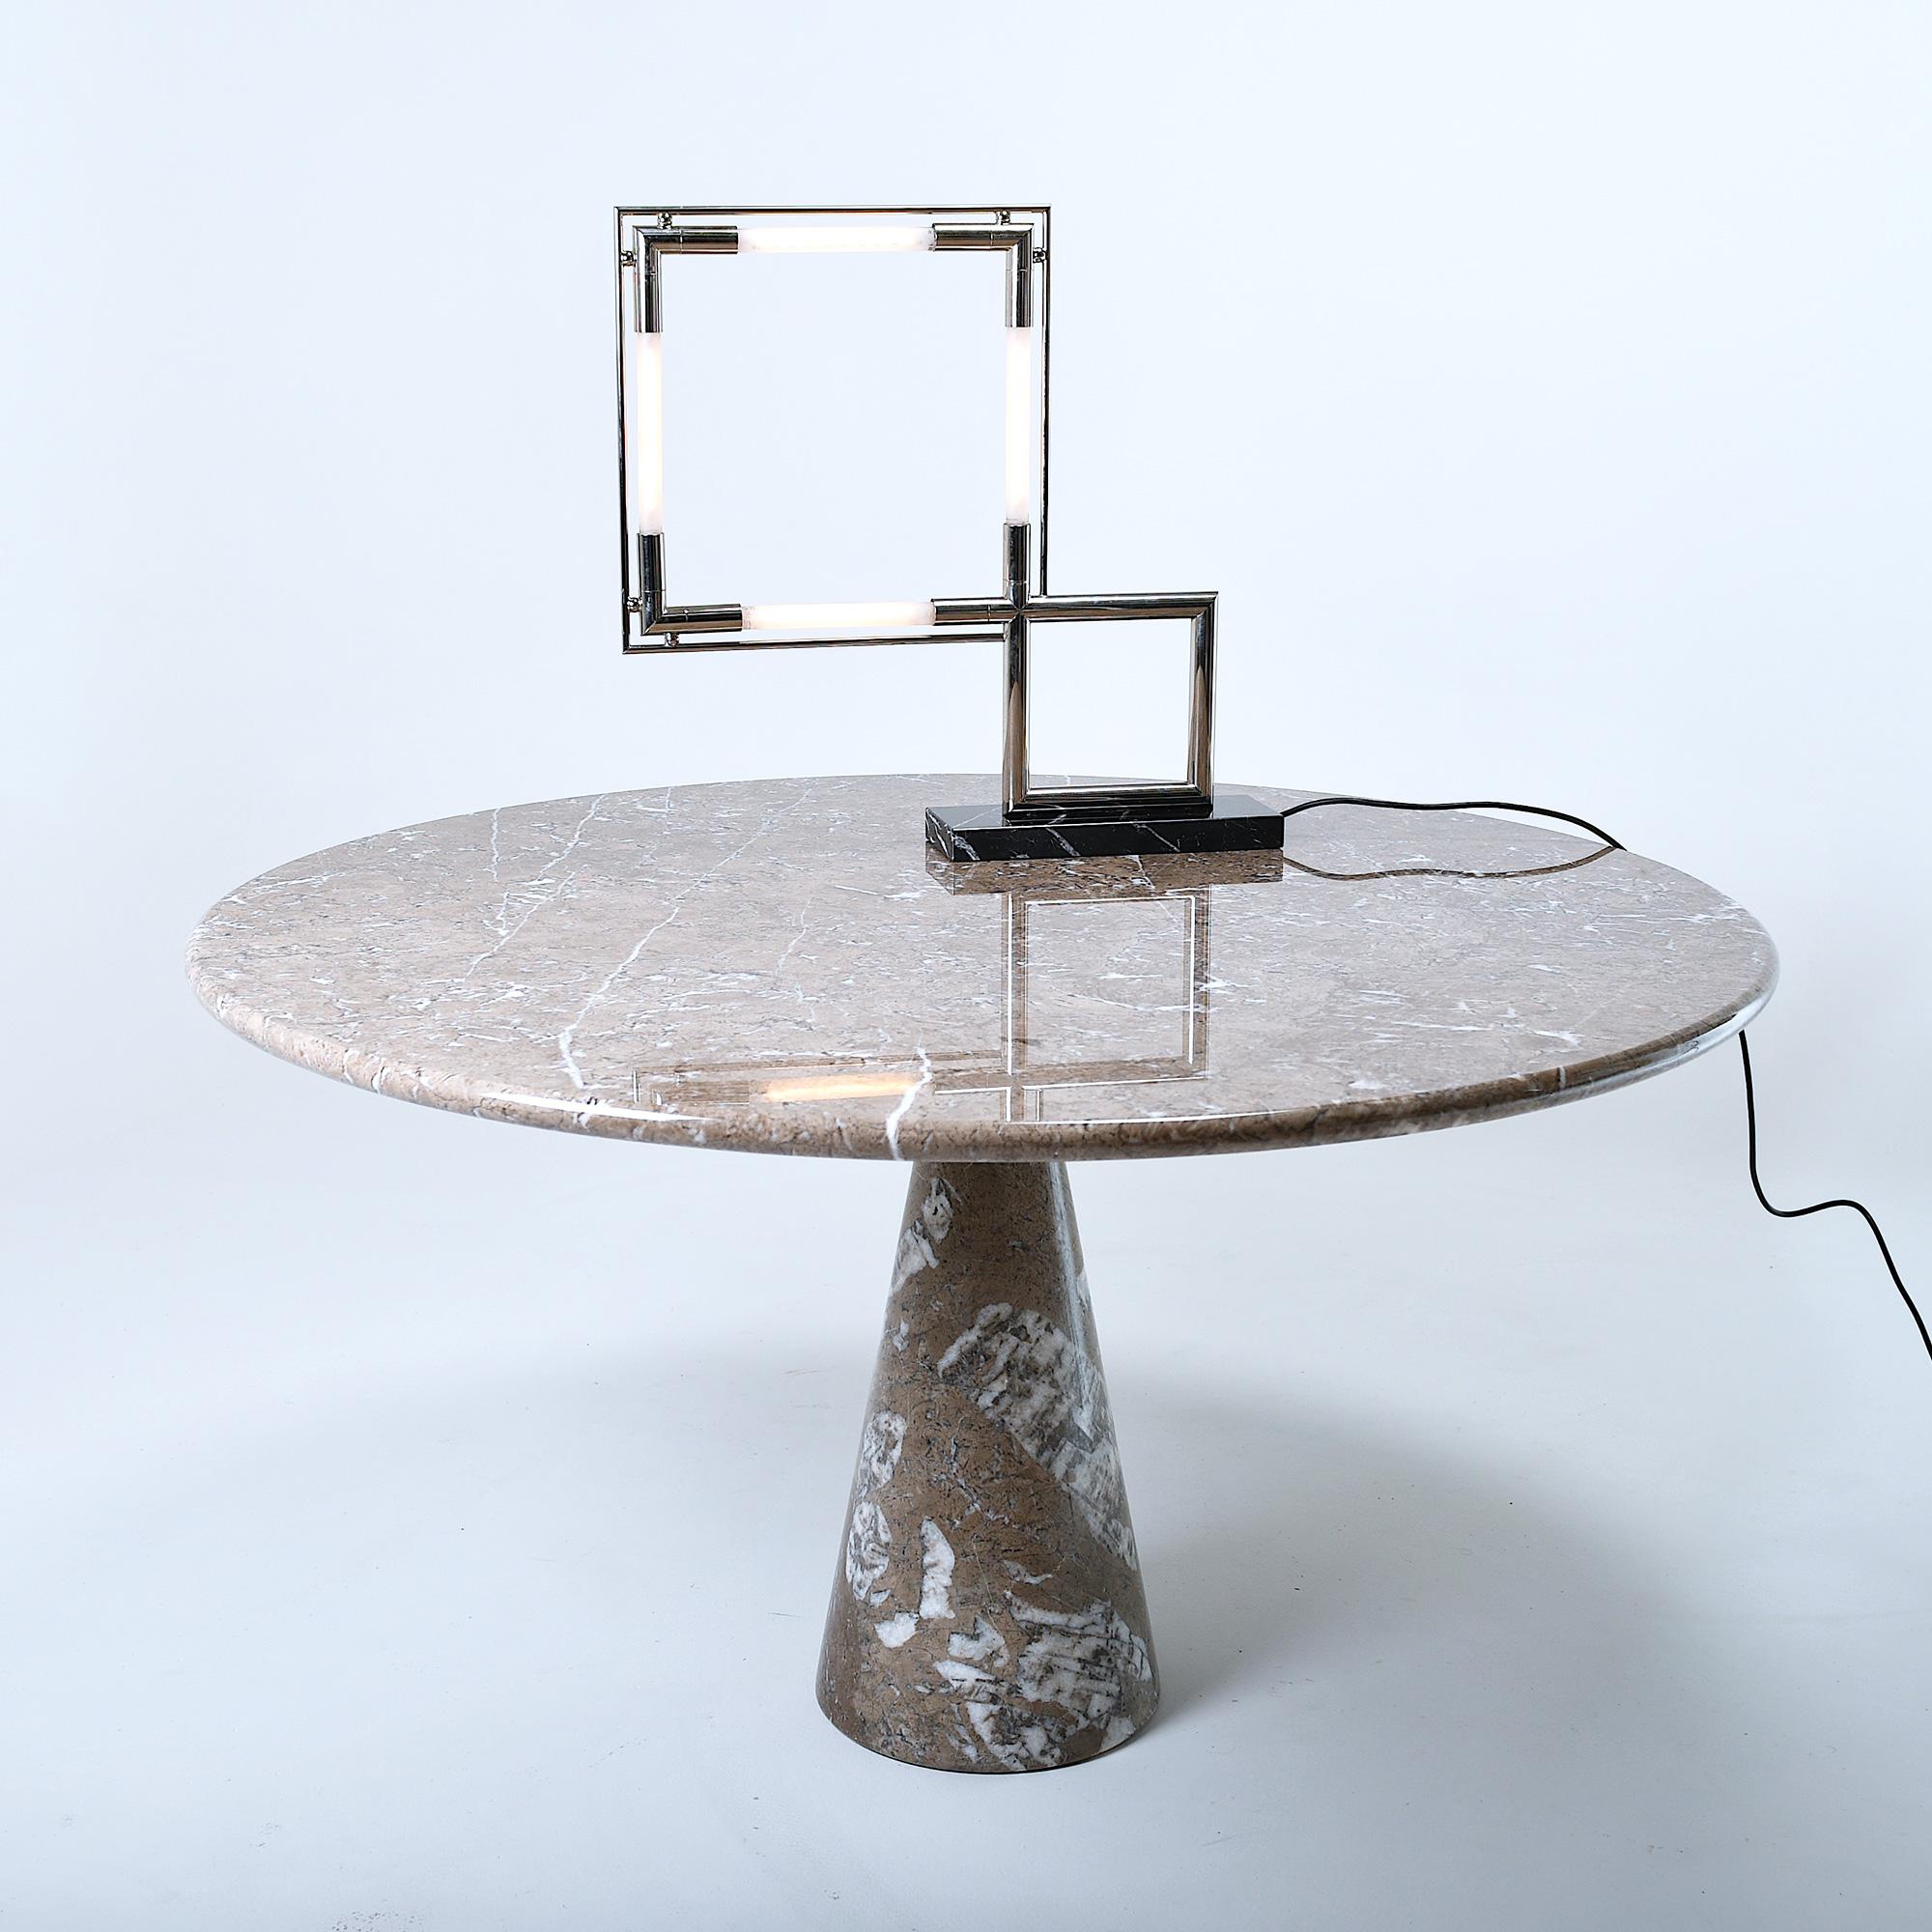 Late 20th Century Mid-Century Modern Angelo Mangiarotti Marble Dining Table 1972 by Skipper, Italy